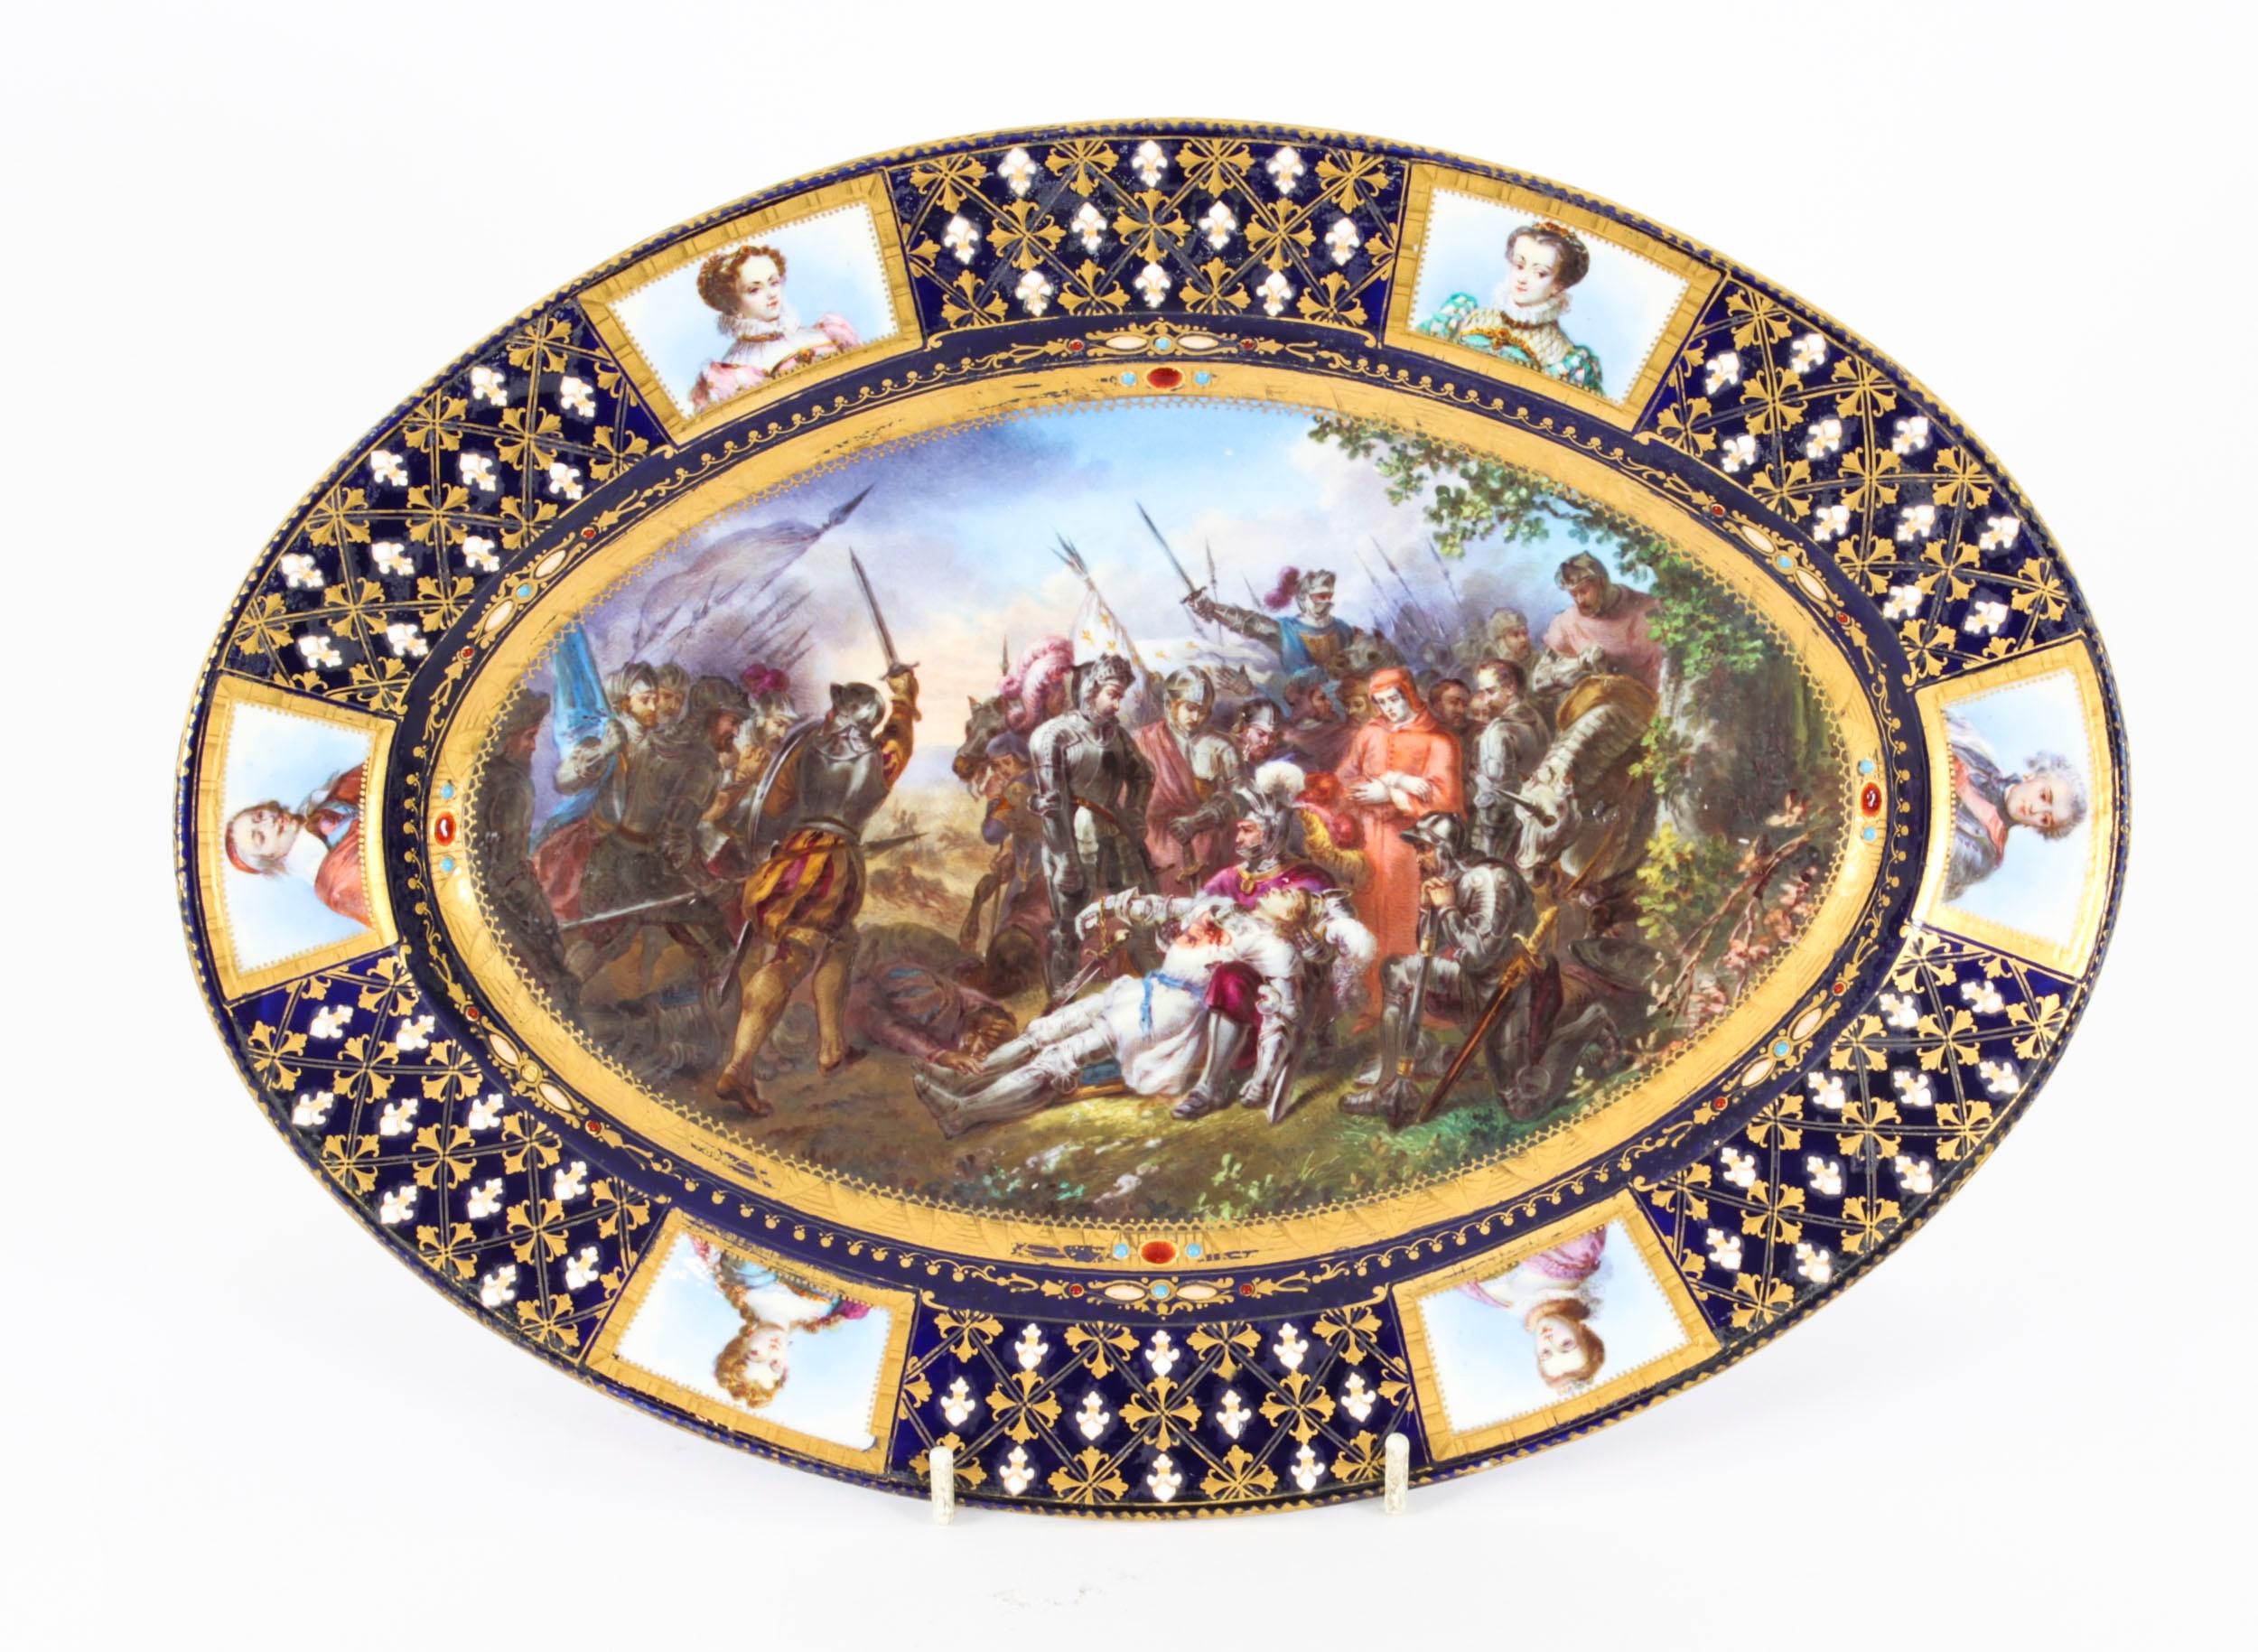 Antique French Sevres Oval Porcelain Dish, Late 18th Century For Sale 11